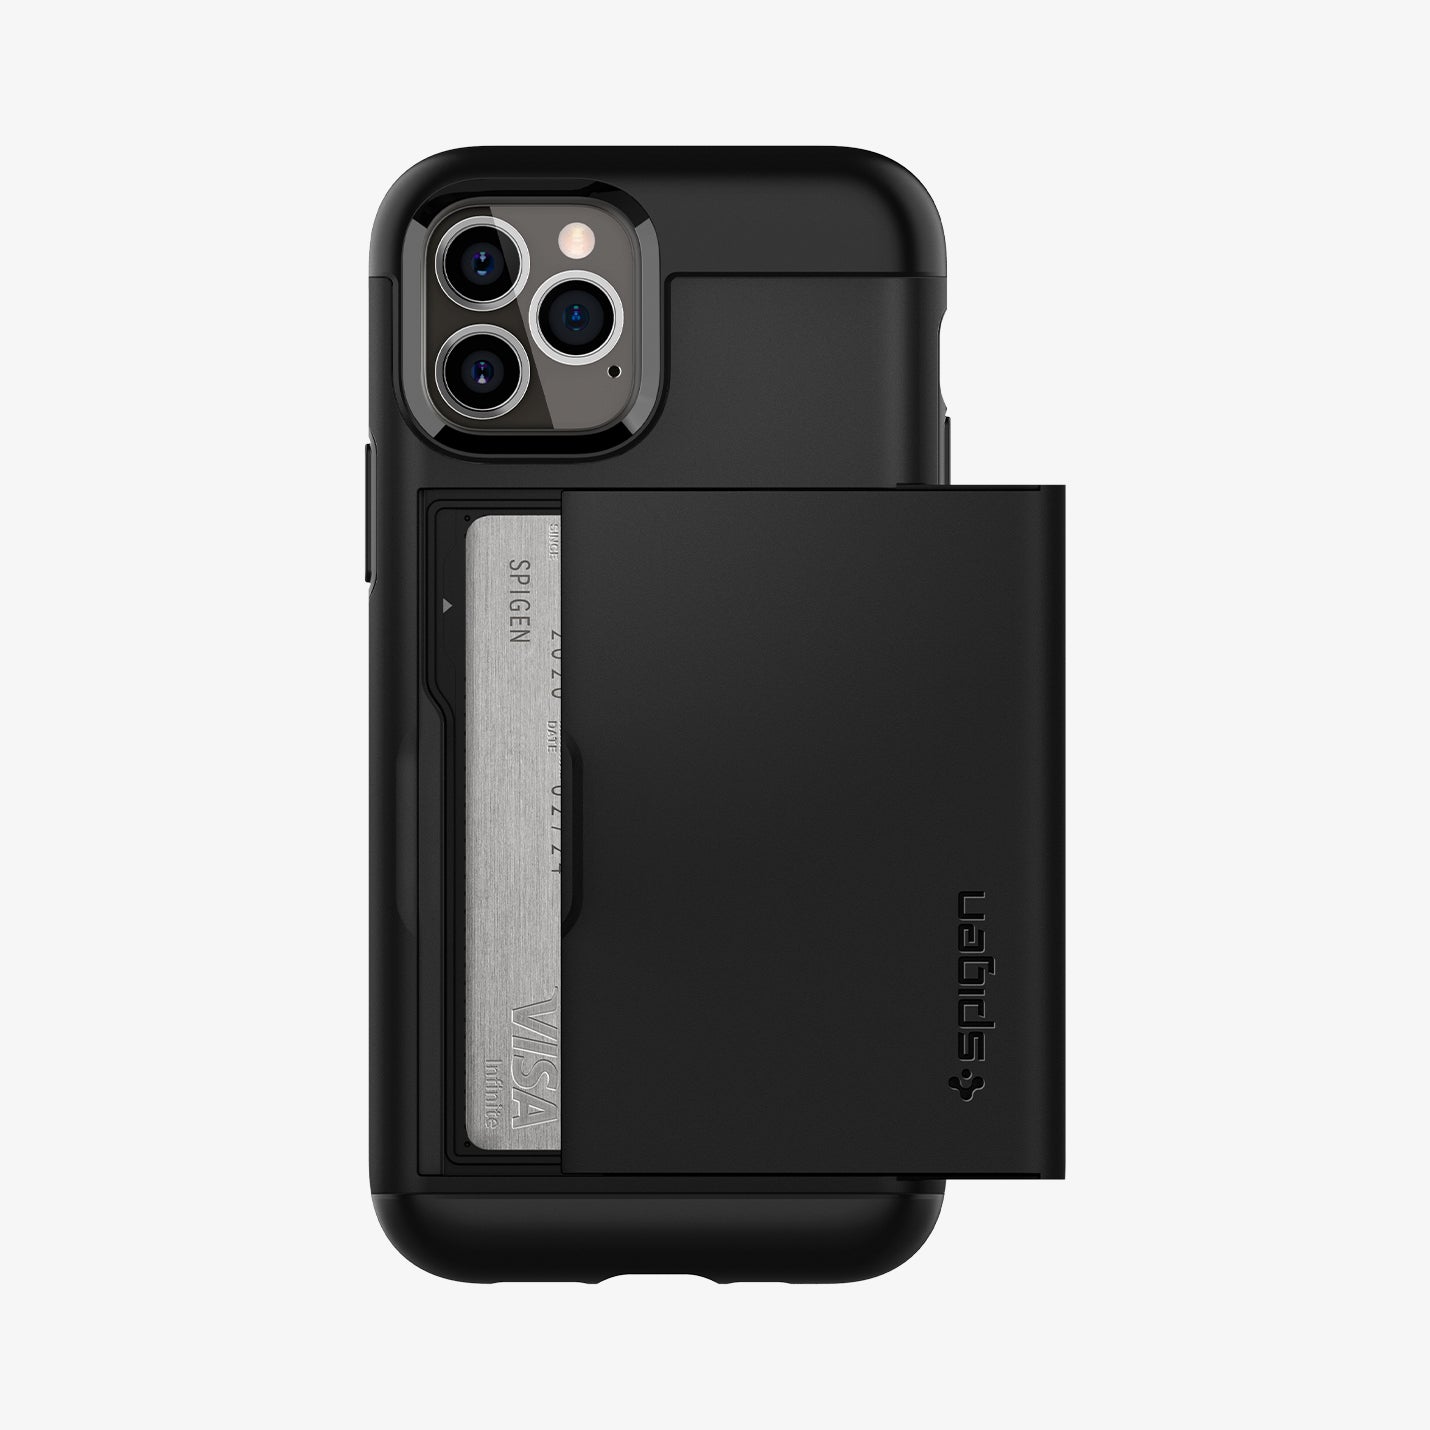 ACS01707 - iPhone 12 / iPhone 12 Pro Case Slim Armor CS in black showing the back with card in slot